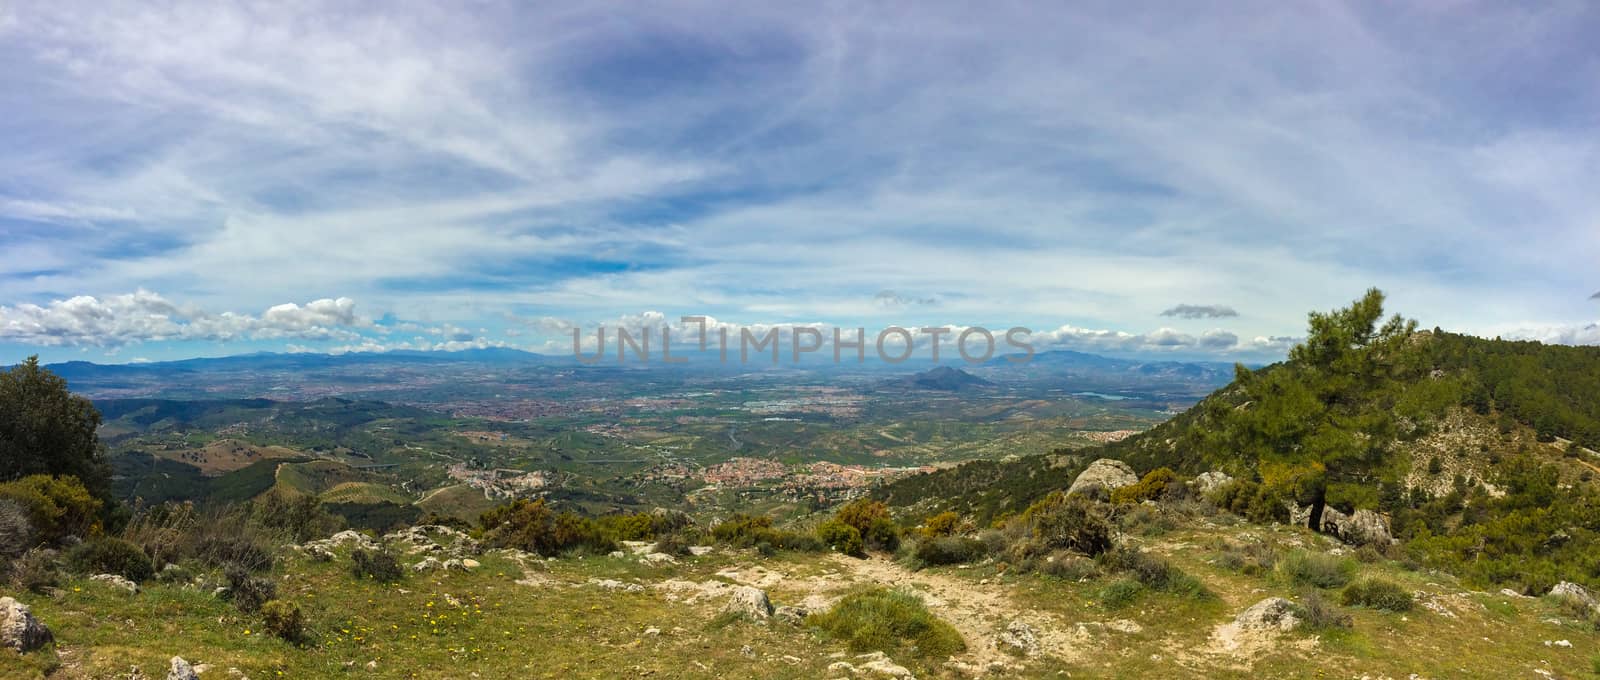 Sierra Nevada, Spain, landscape and nature in panorama